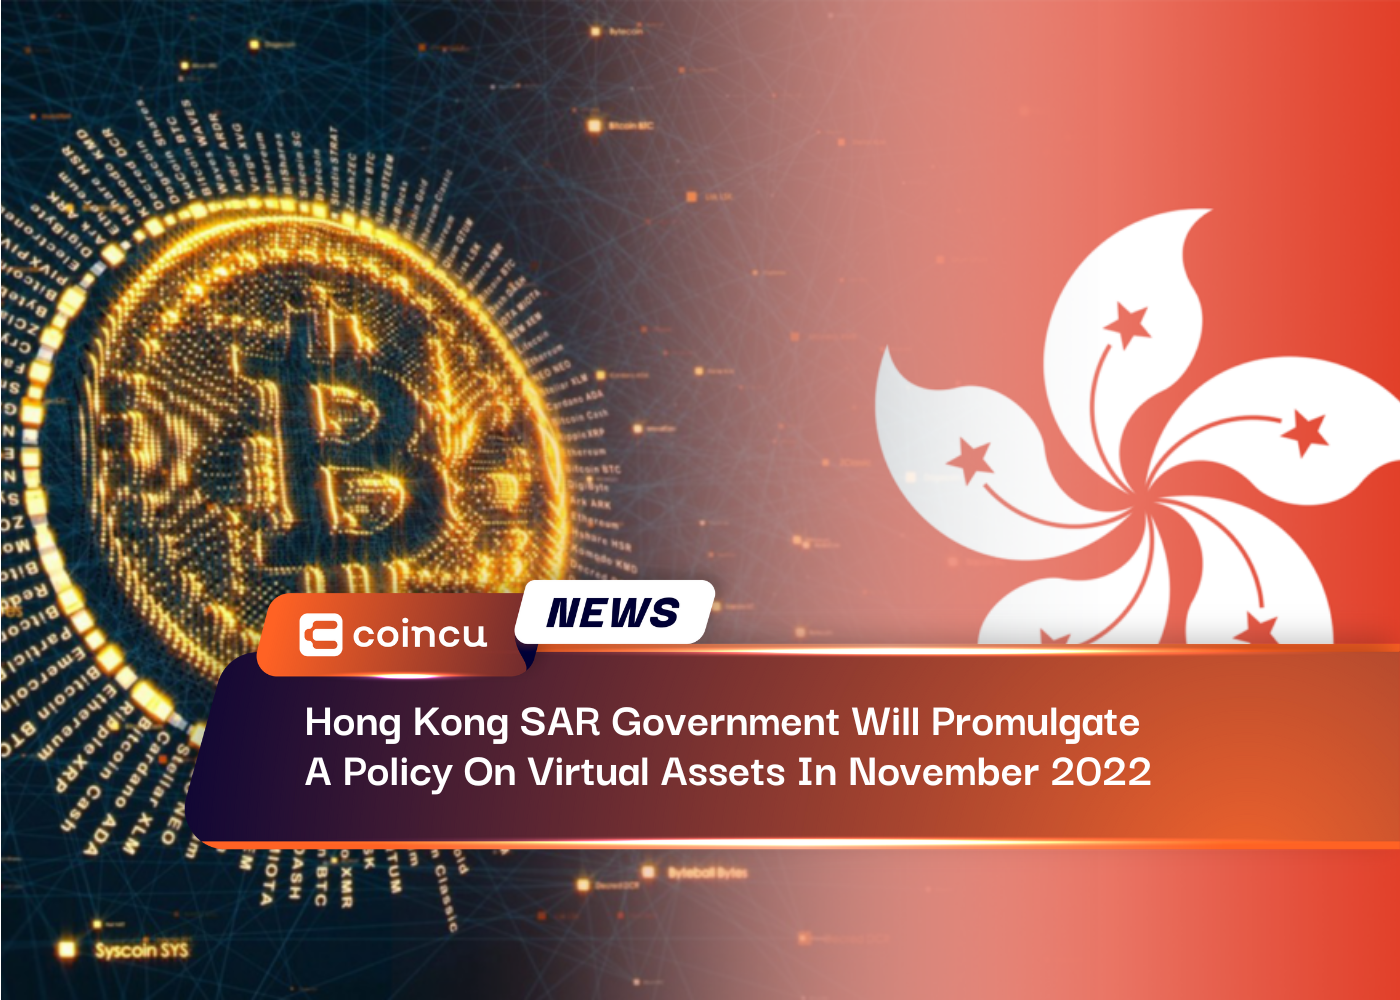 Hong Kong SAR Government Will Promulgate A Policy On Virtual Assets In November 2022